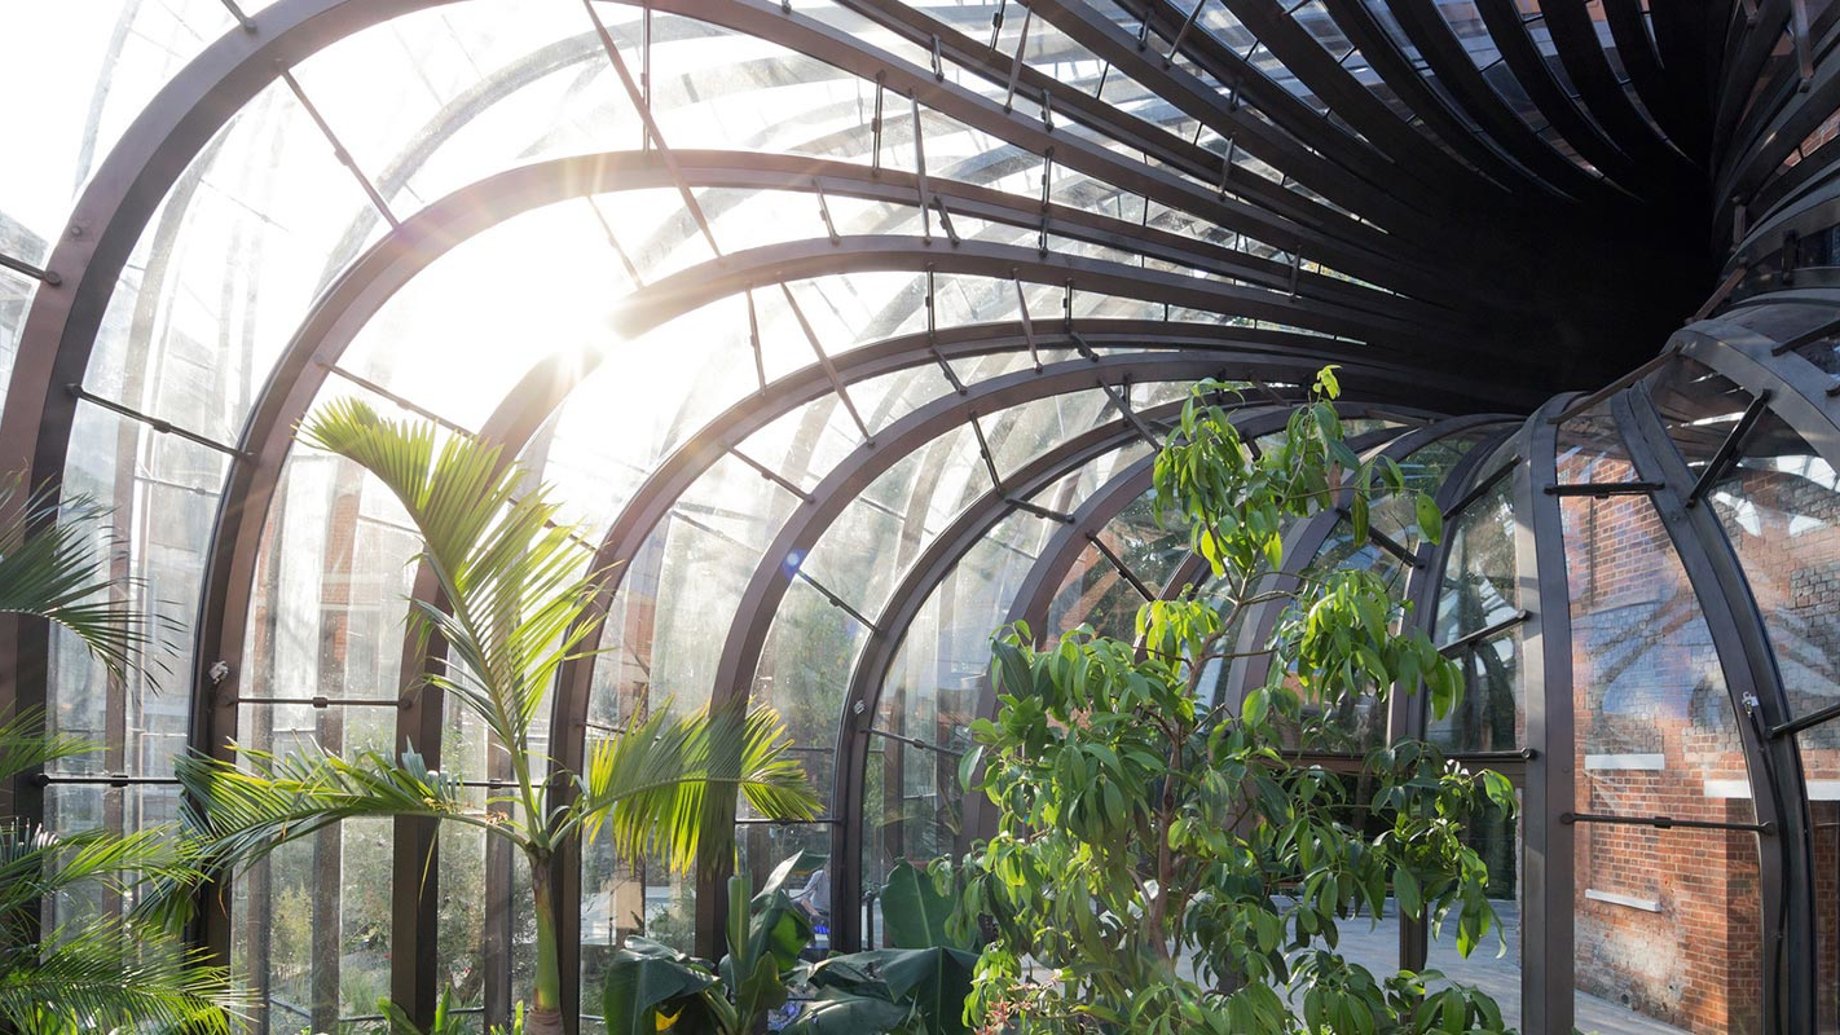 Internal view of one of the glasshouses with the botanicals used in the gin production